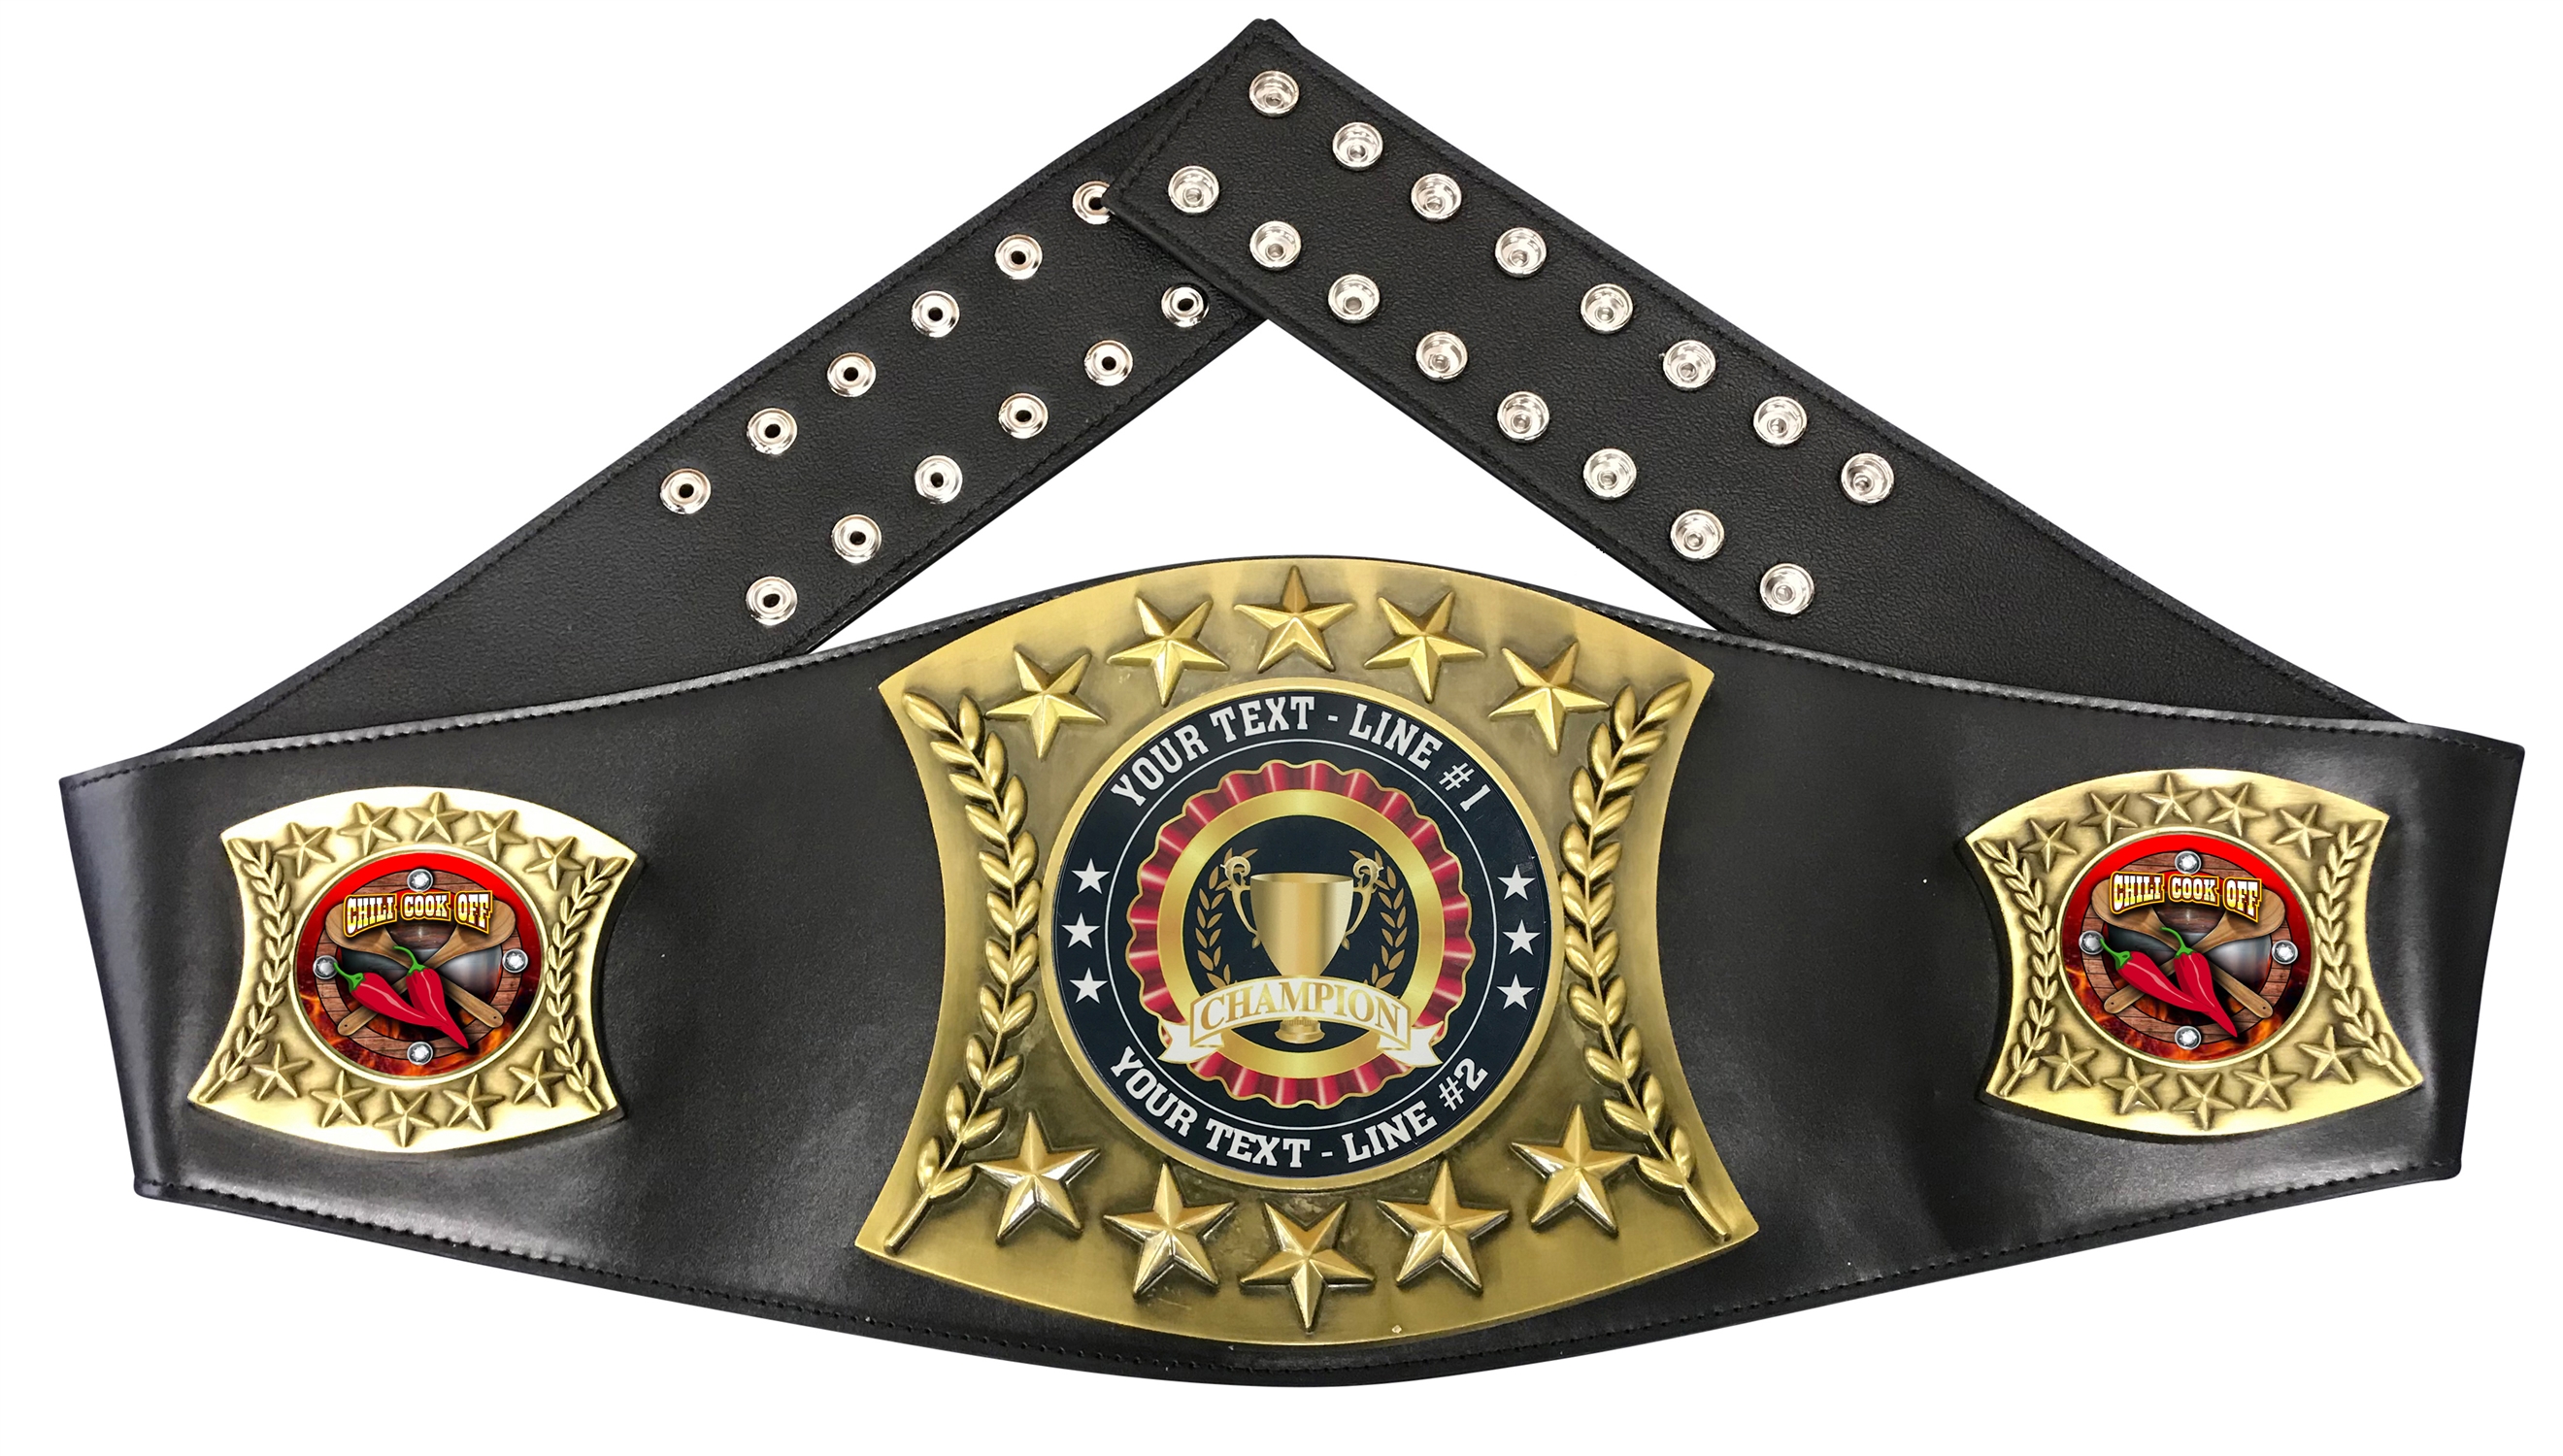 Chili Cook Off Personalized Championship Belt